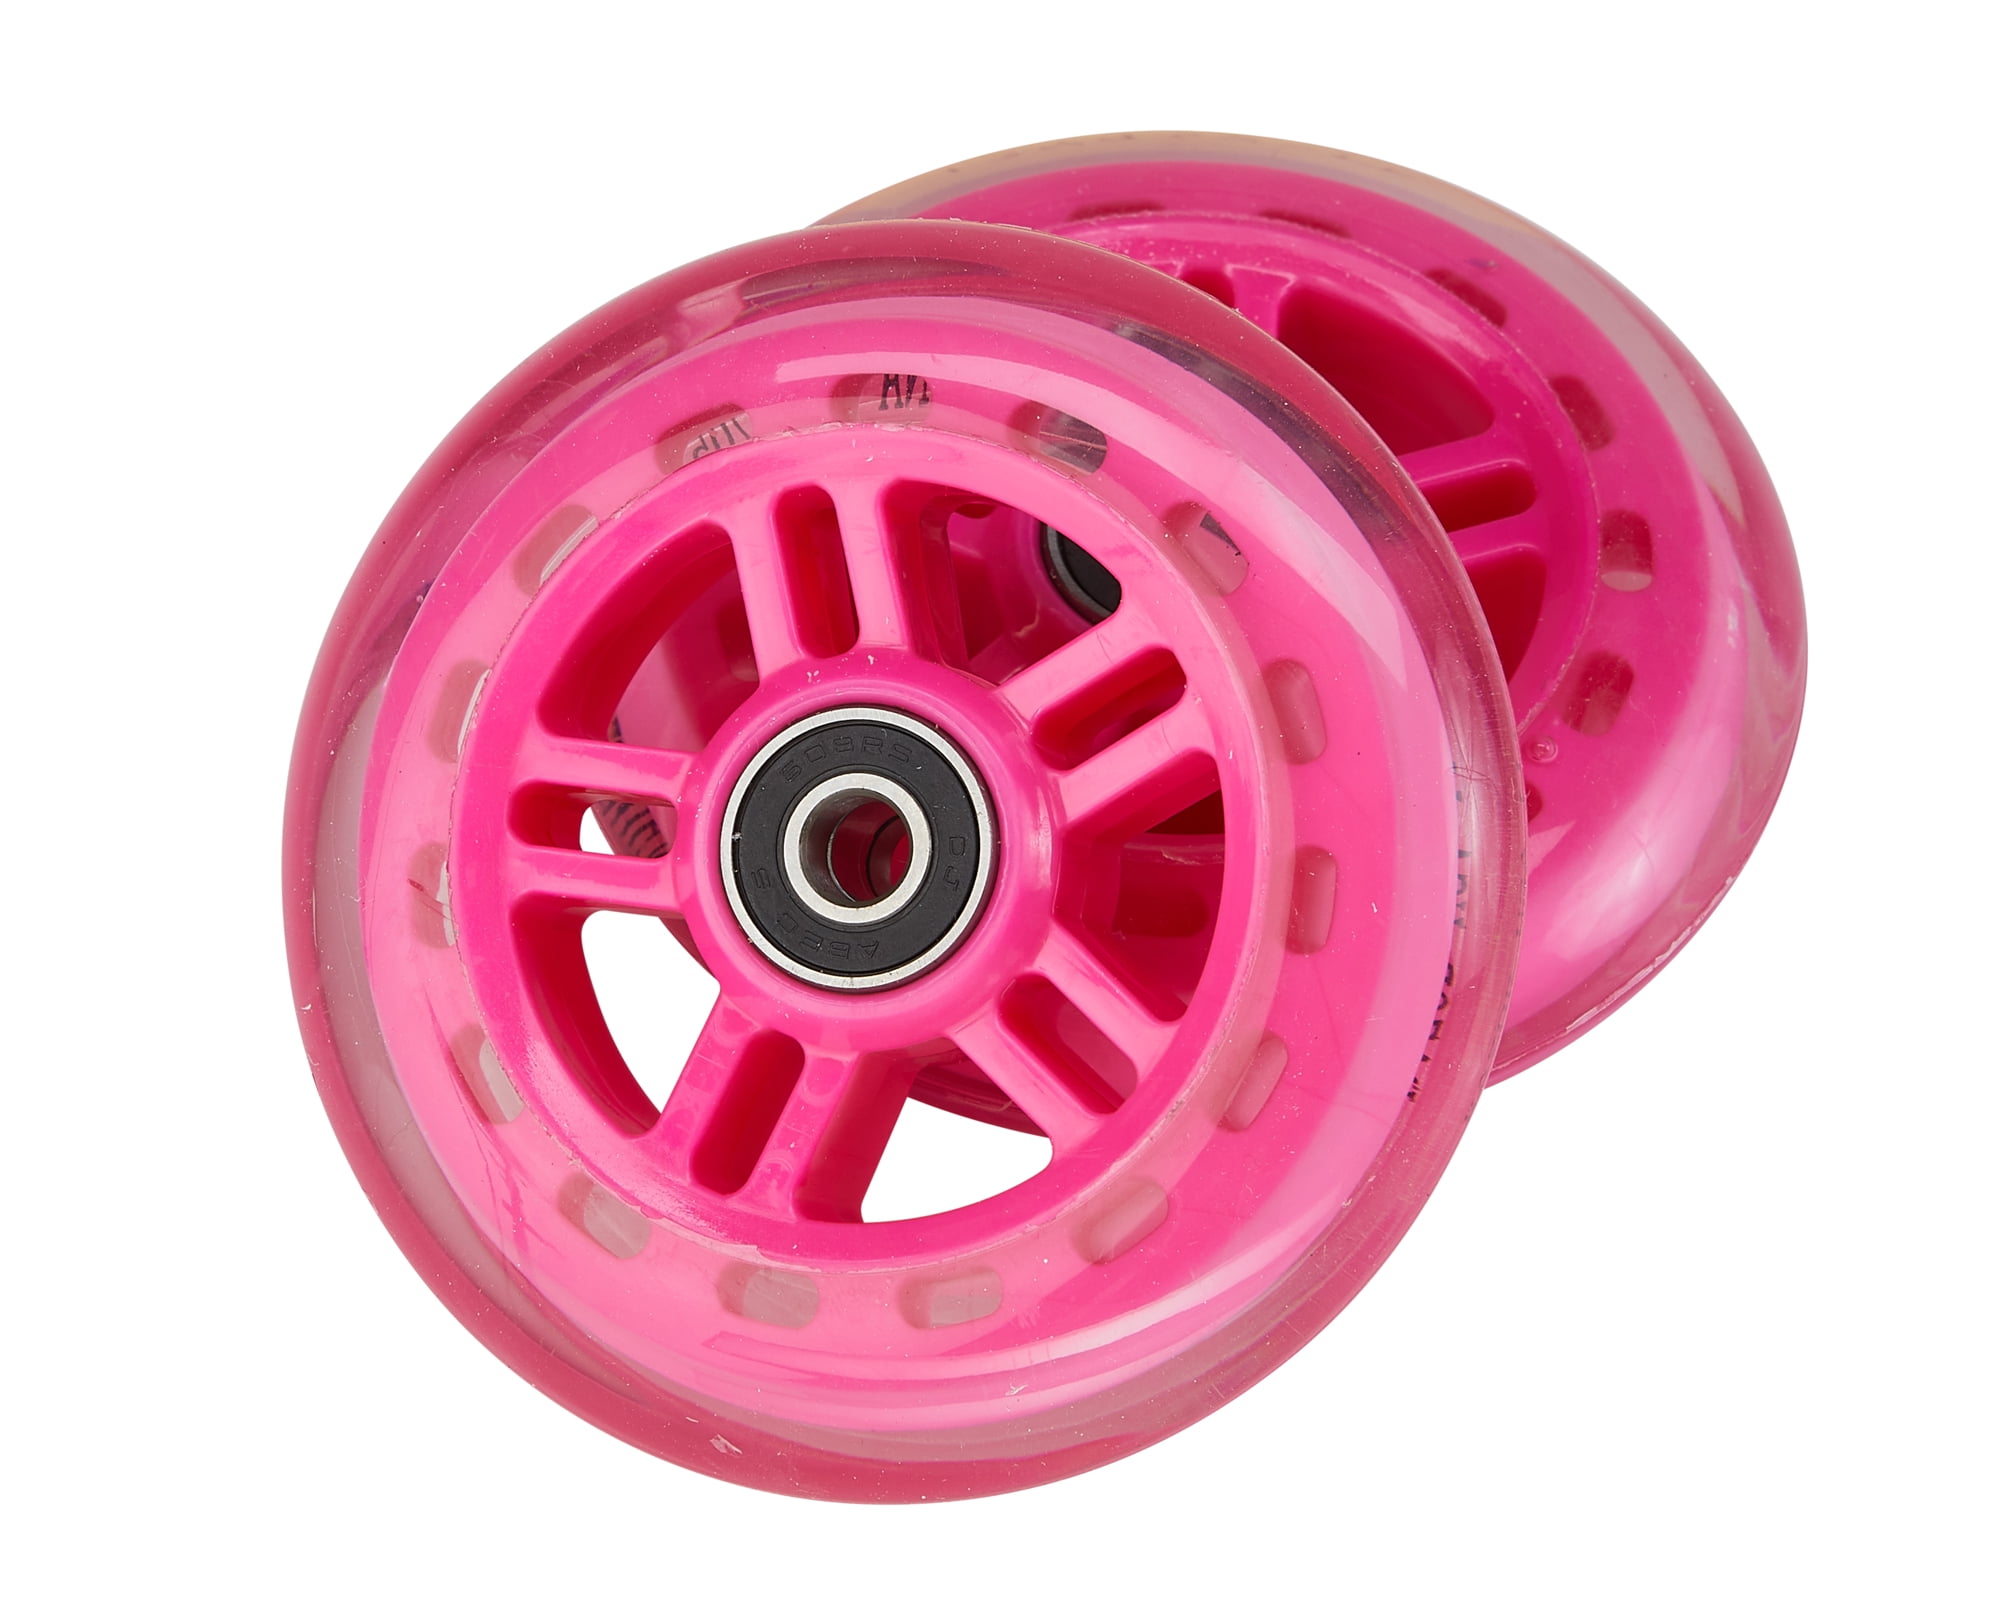 Razor Scooter Replacement Wheels - A,A2,A4,Spark,Spark 2.0,and Sweet Pea 